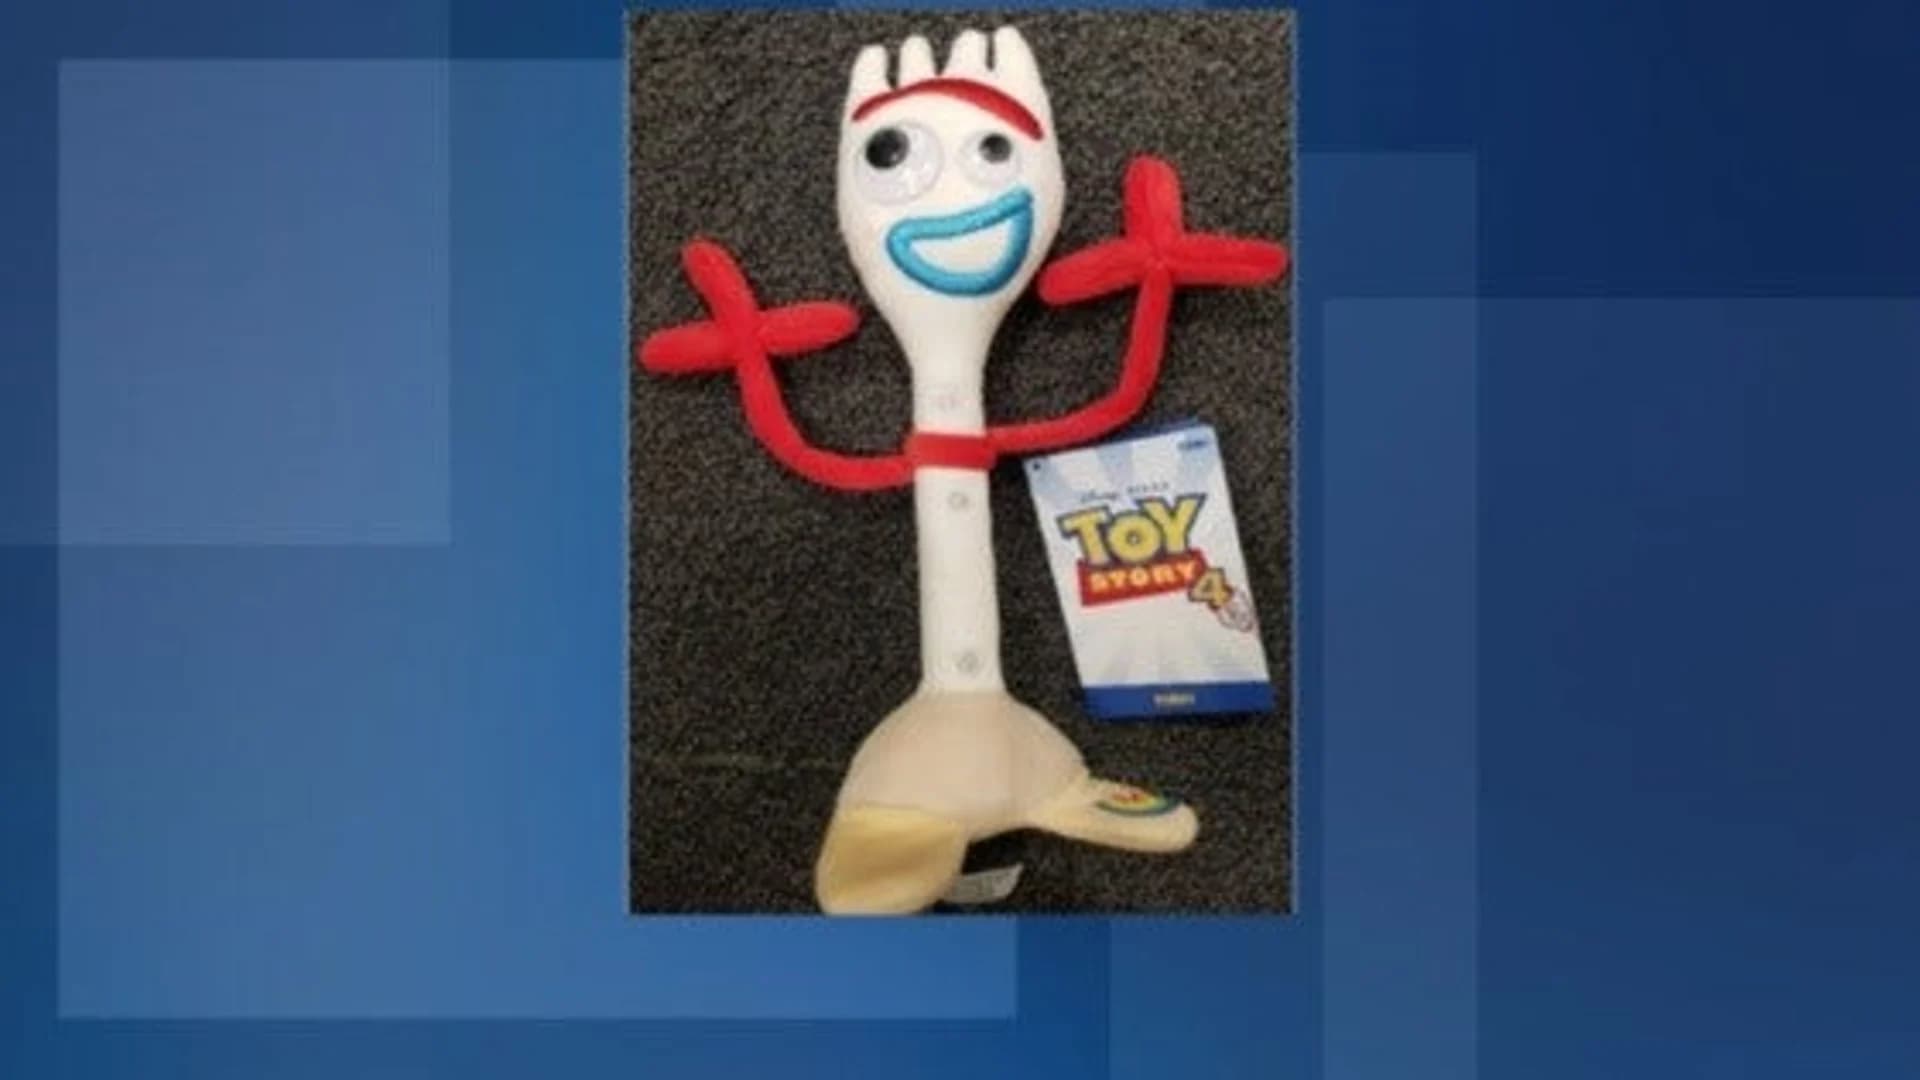 Around 80,000 of new Toy Story 4 toy recalled for possible choking hazard